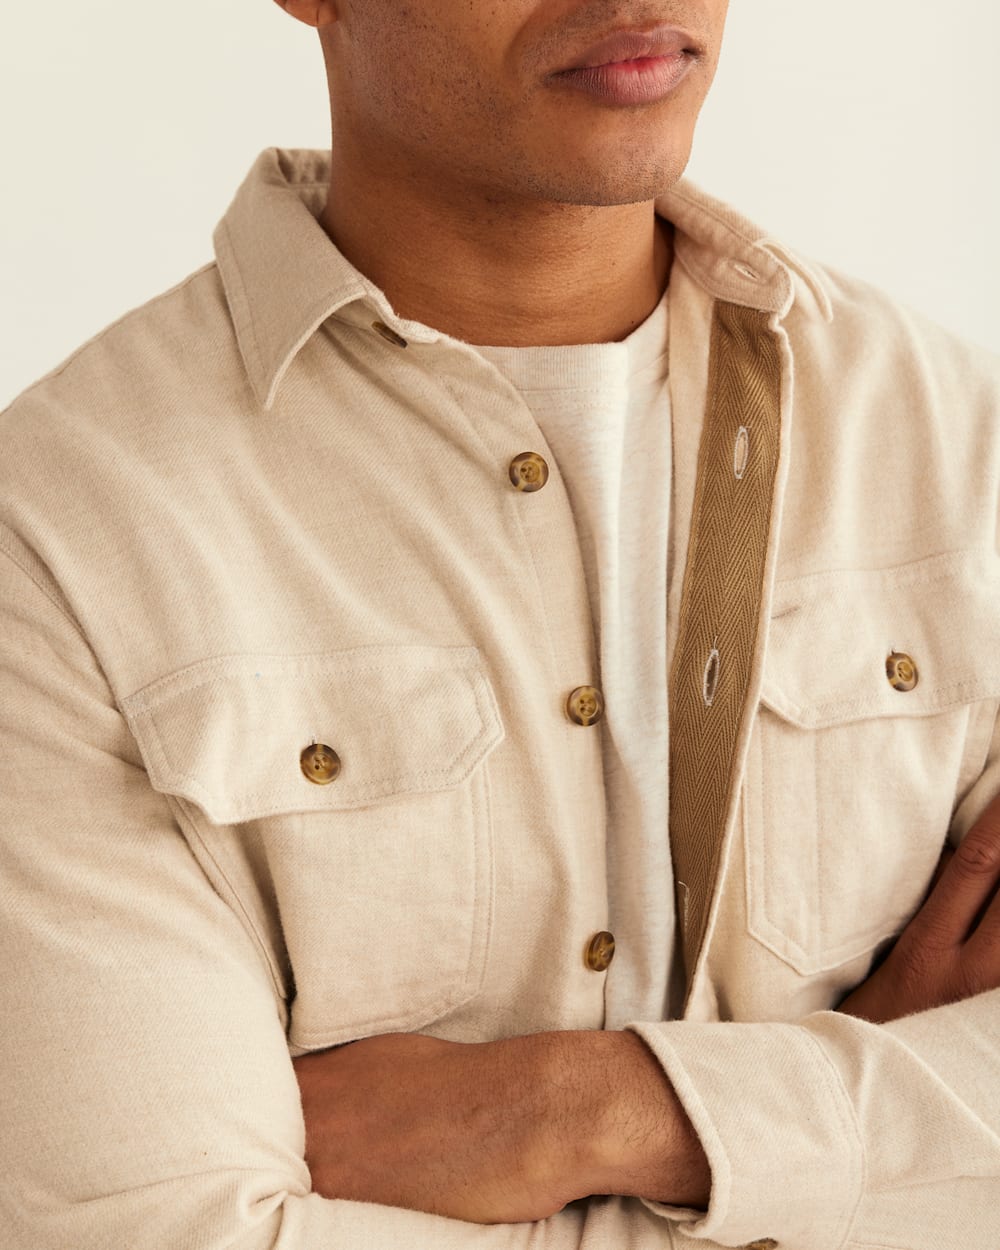 ALTERNATE VIEW OF MEN'S BURNSIDE DOUBLE-BRUSHED FLANNEL SHIRT IN SAND HEATHER image number 4